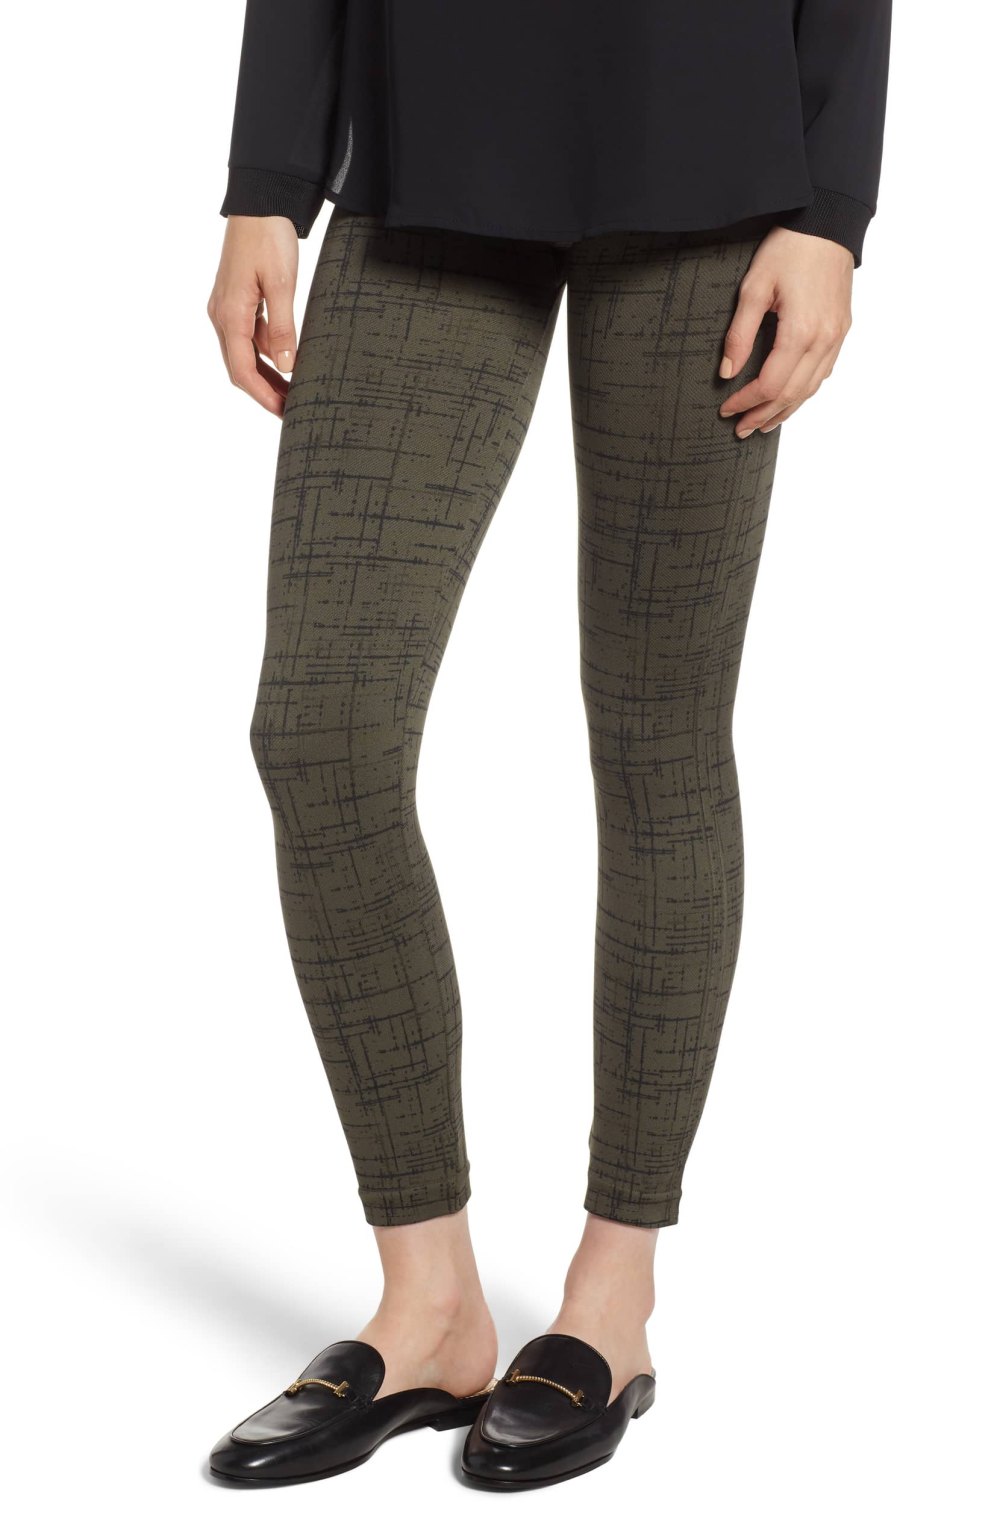 Spanx - Look at Me Now Seamless Leggings - Charcoal Heather Gray